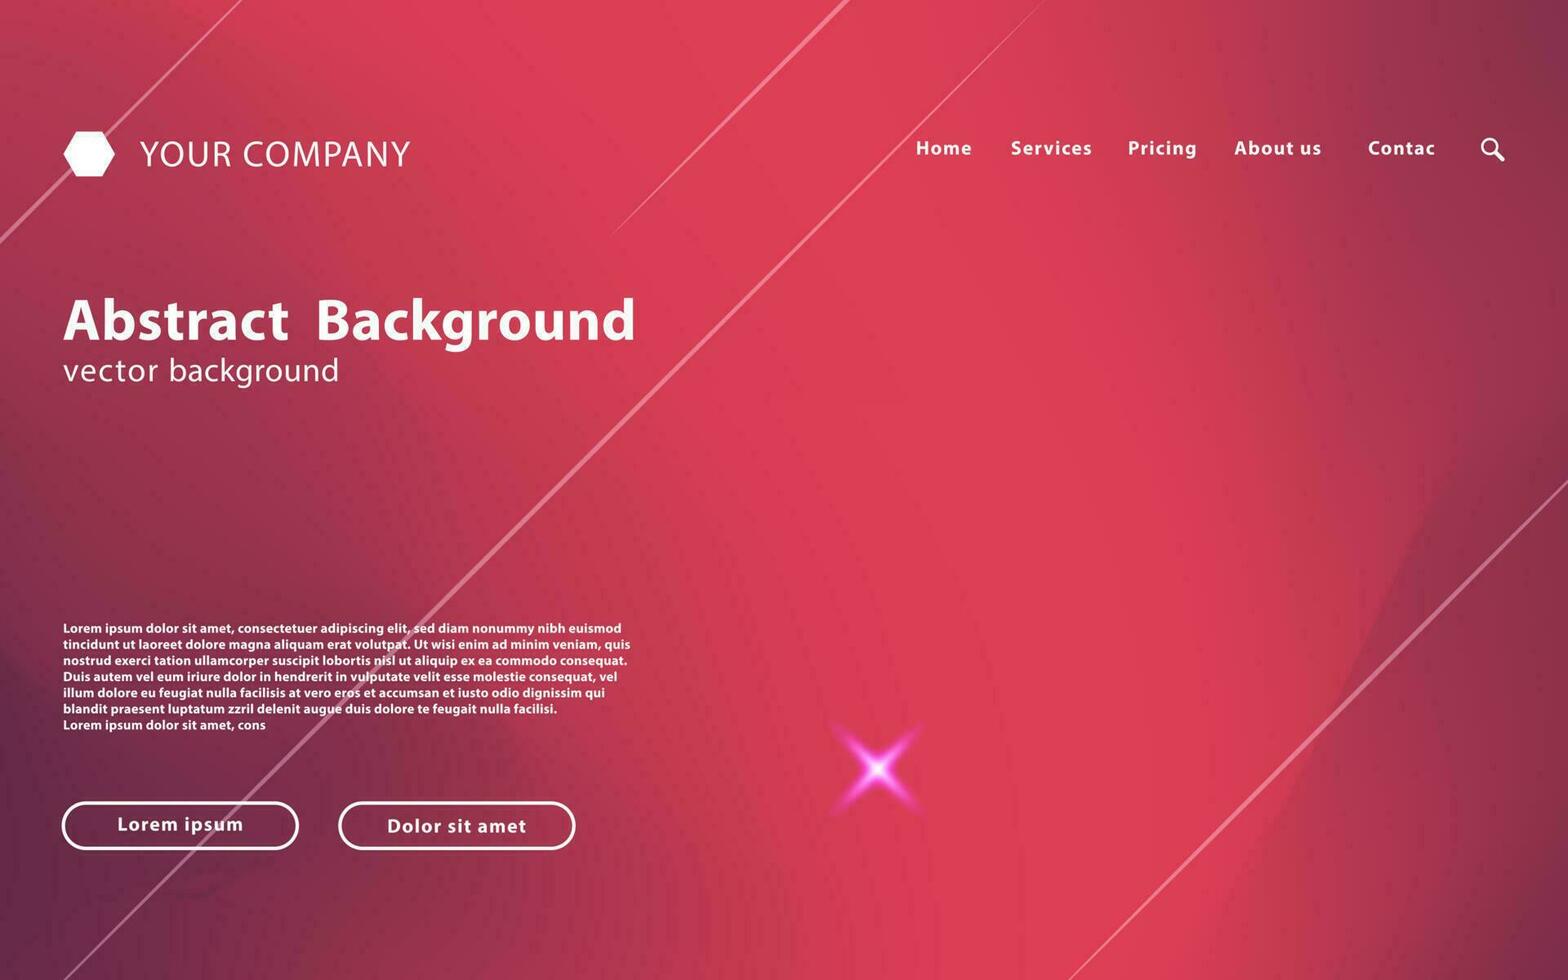 modern colorful abstract landing page background. landing page template,gradient background template,abstract background,user interface background,vector illustration. vector